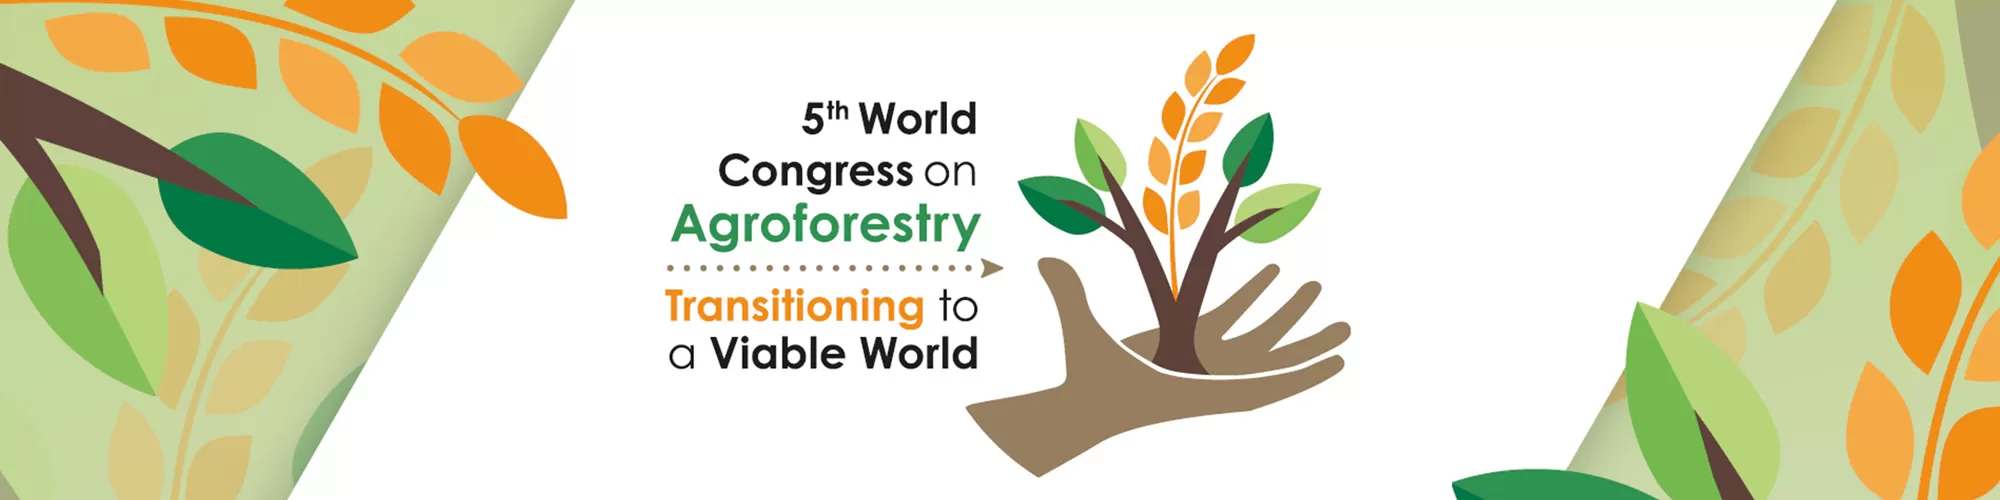 5th World Congress on Agroforestry 2022